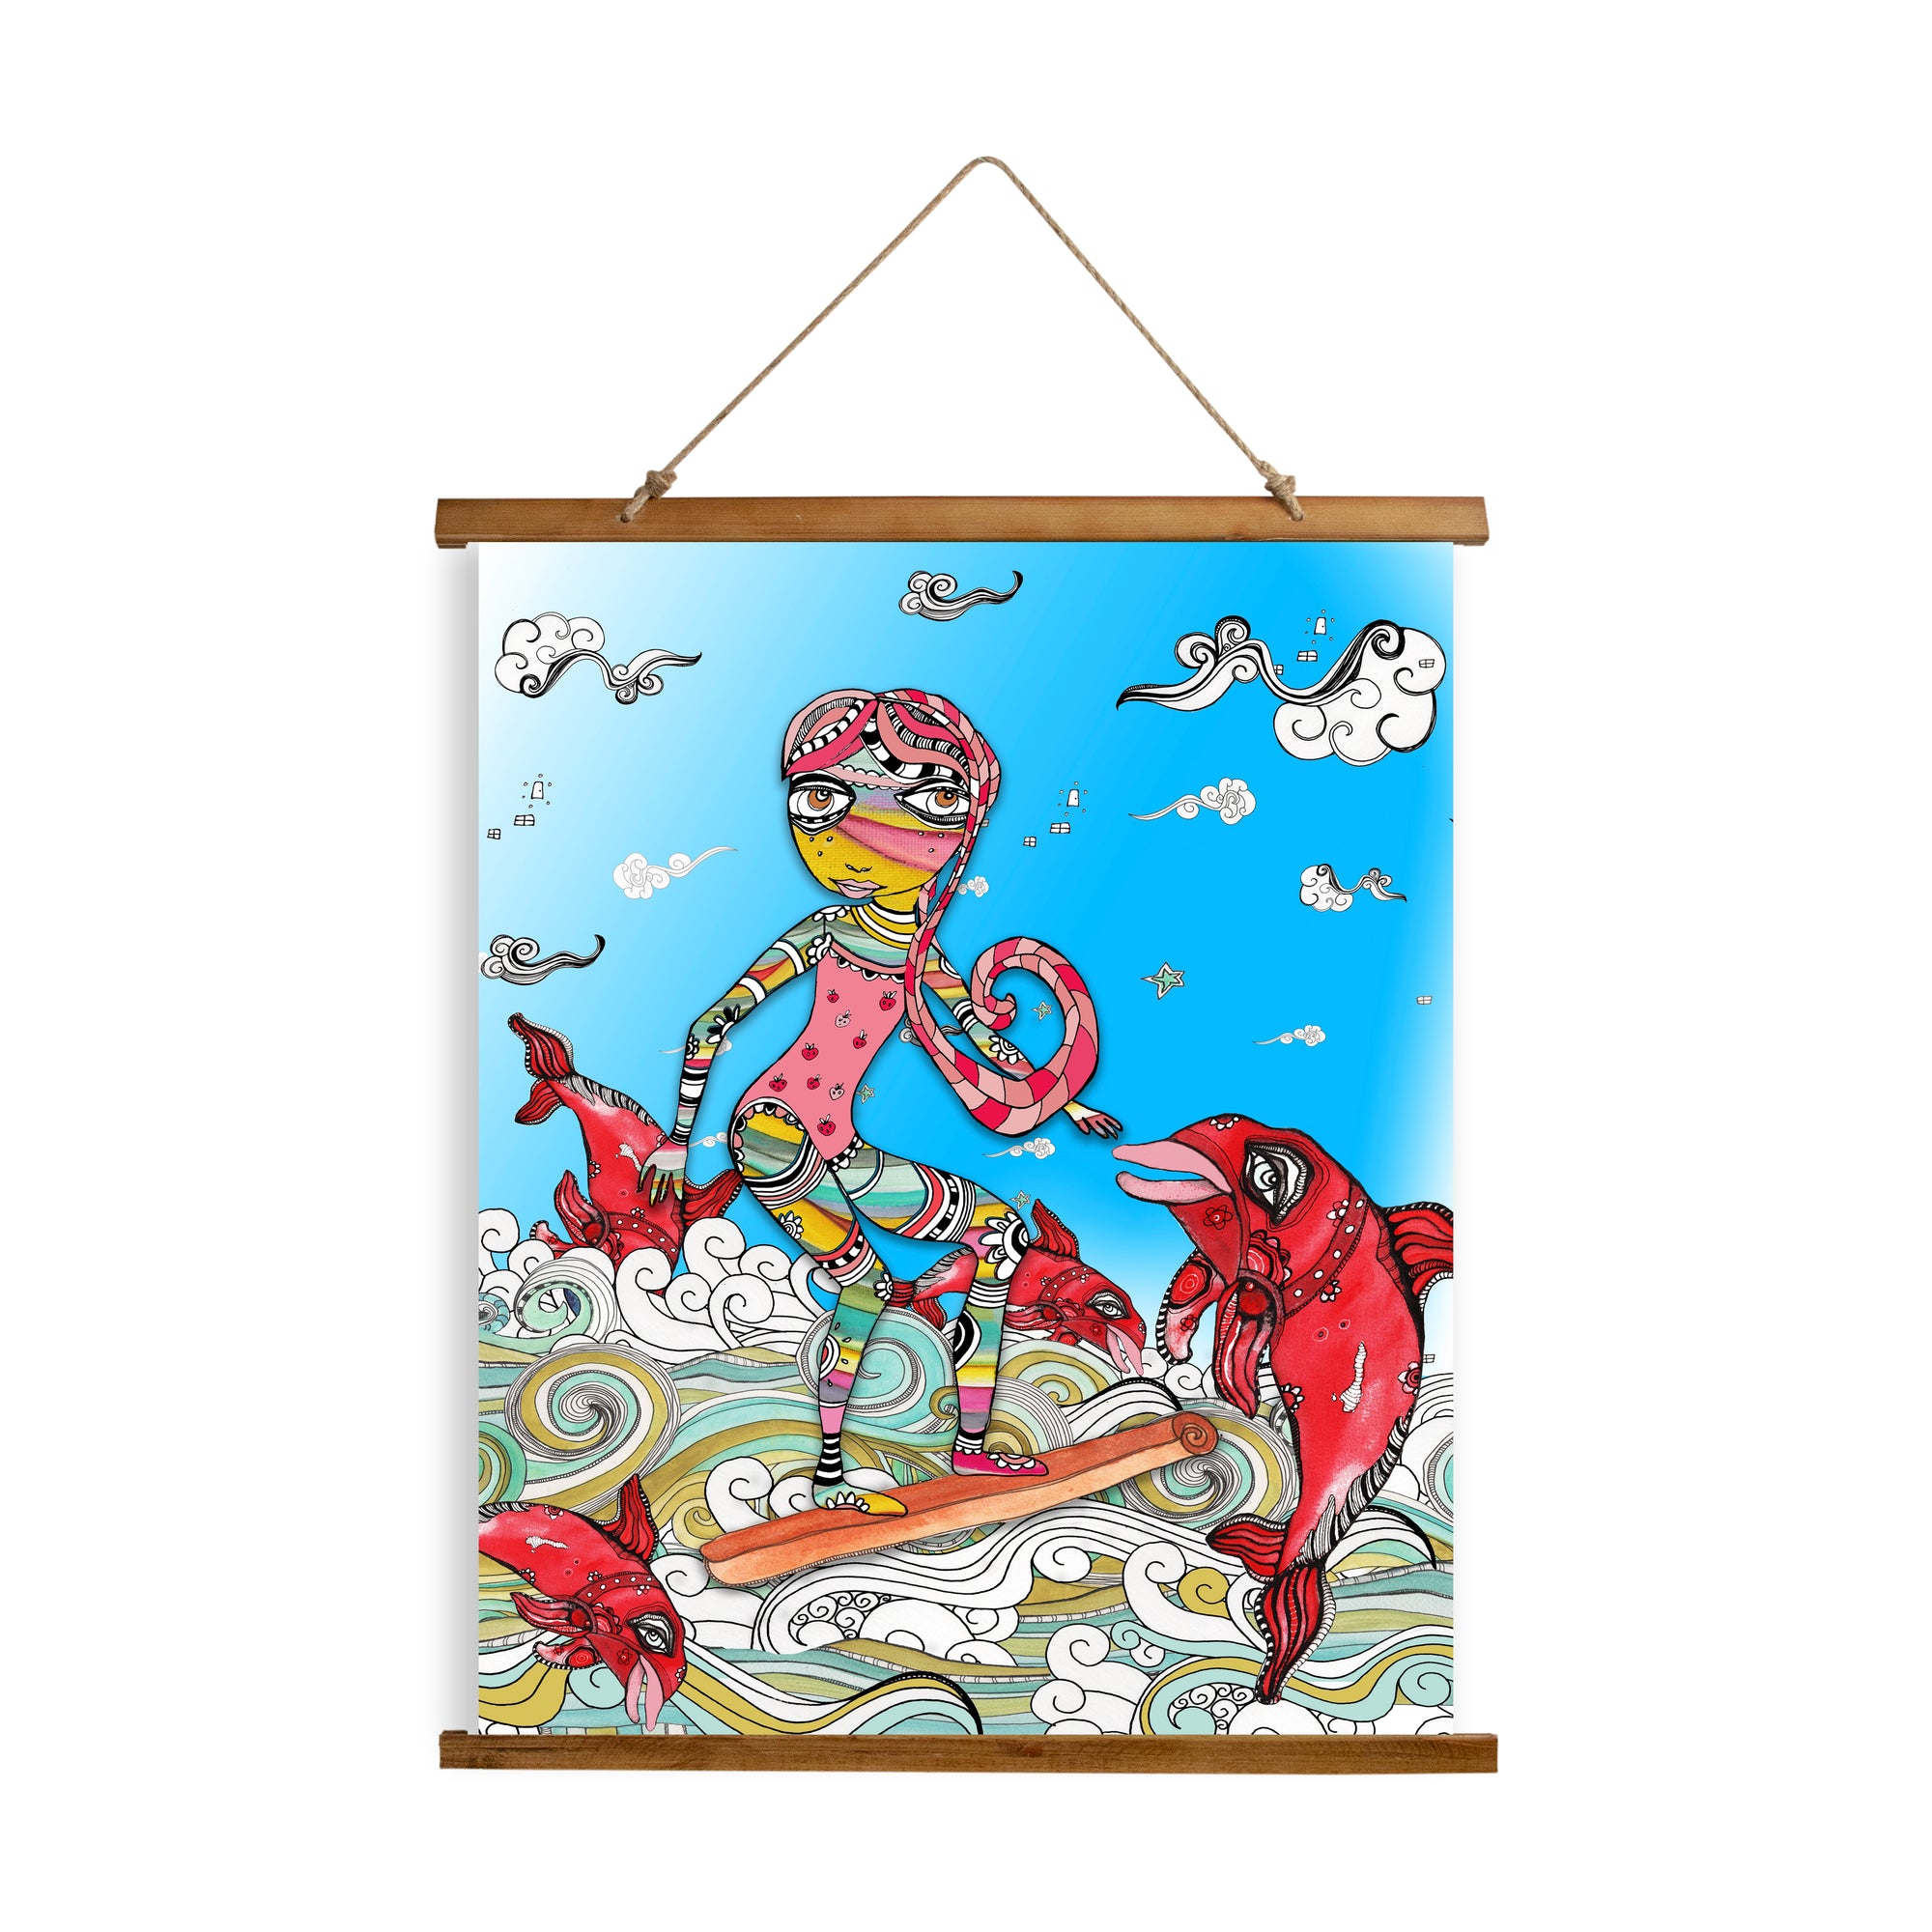 Whimsical Wood Slat Tapestry "Surf on a Cinnamon Stick"